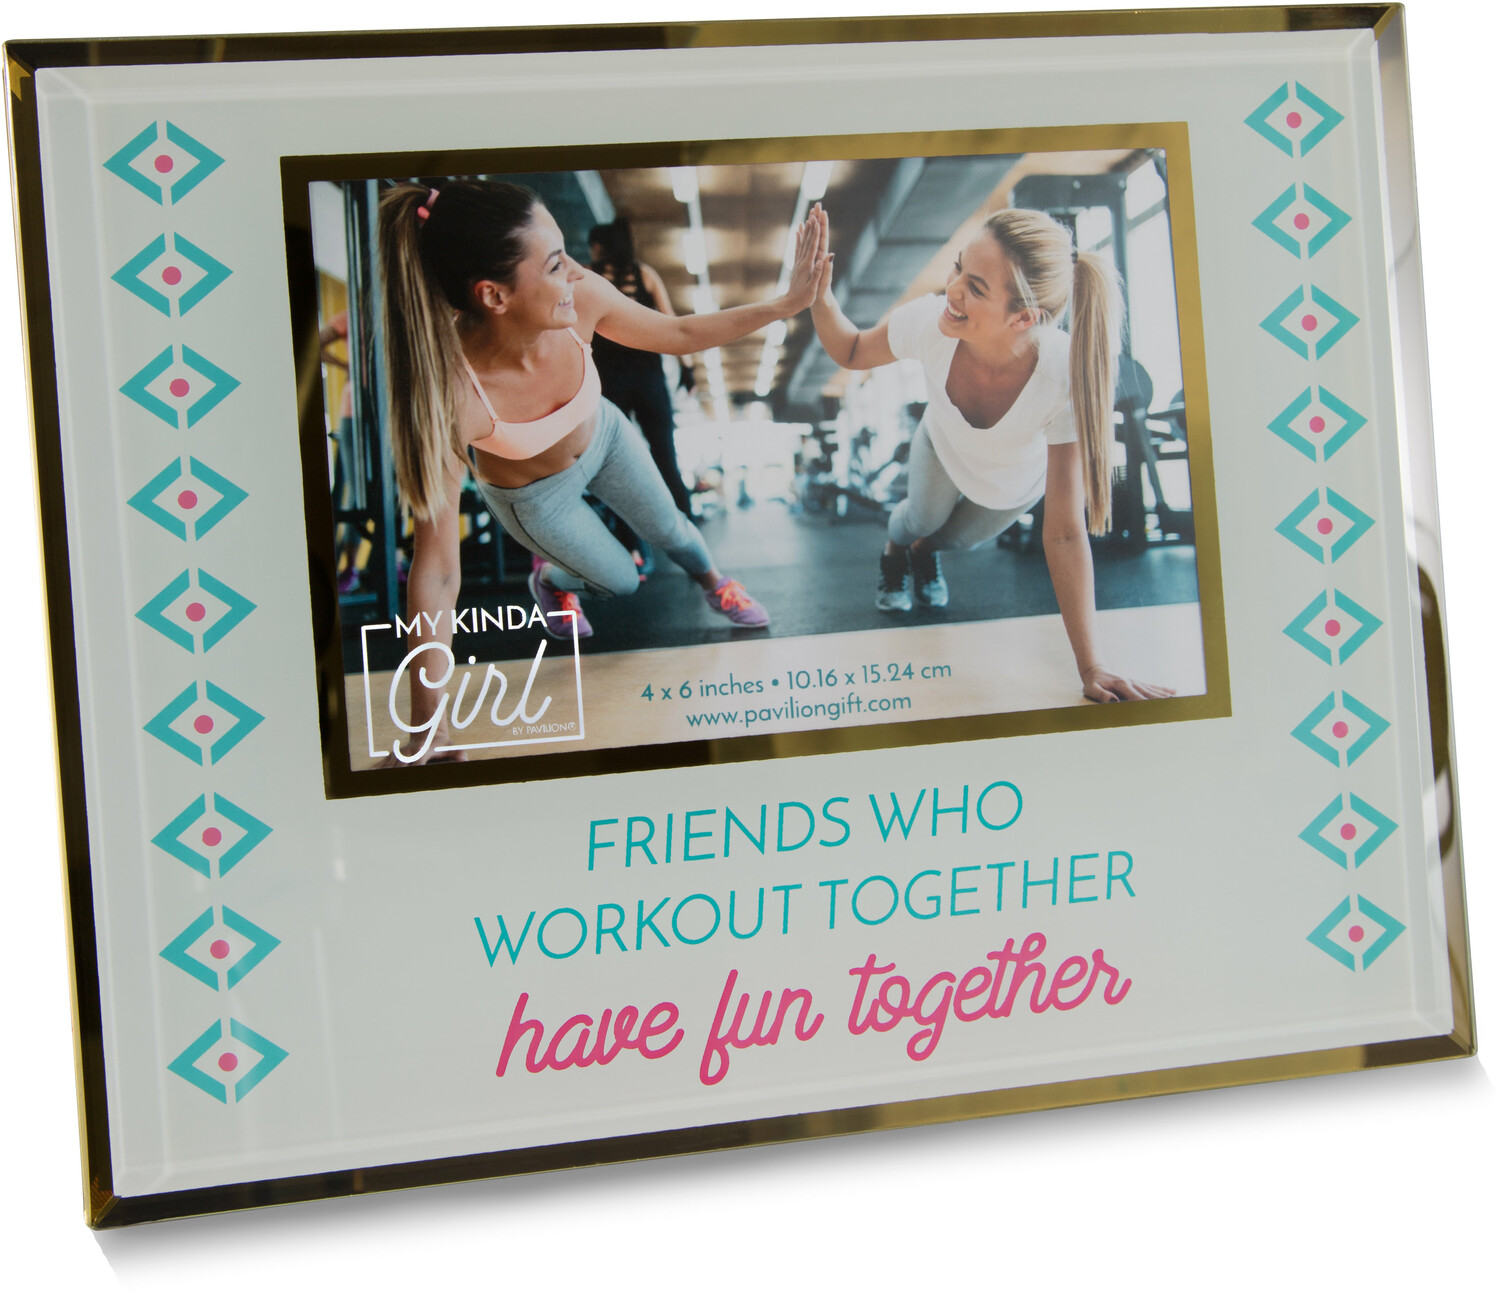 Friends Who Workout by My Kinda Girl - Friends Who Workout - 9.25" x 7.25" Frame (Holds 6" x 4" Photo)